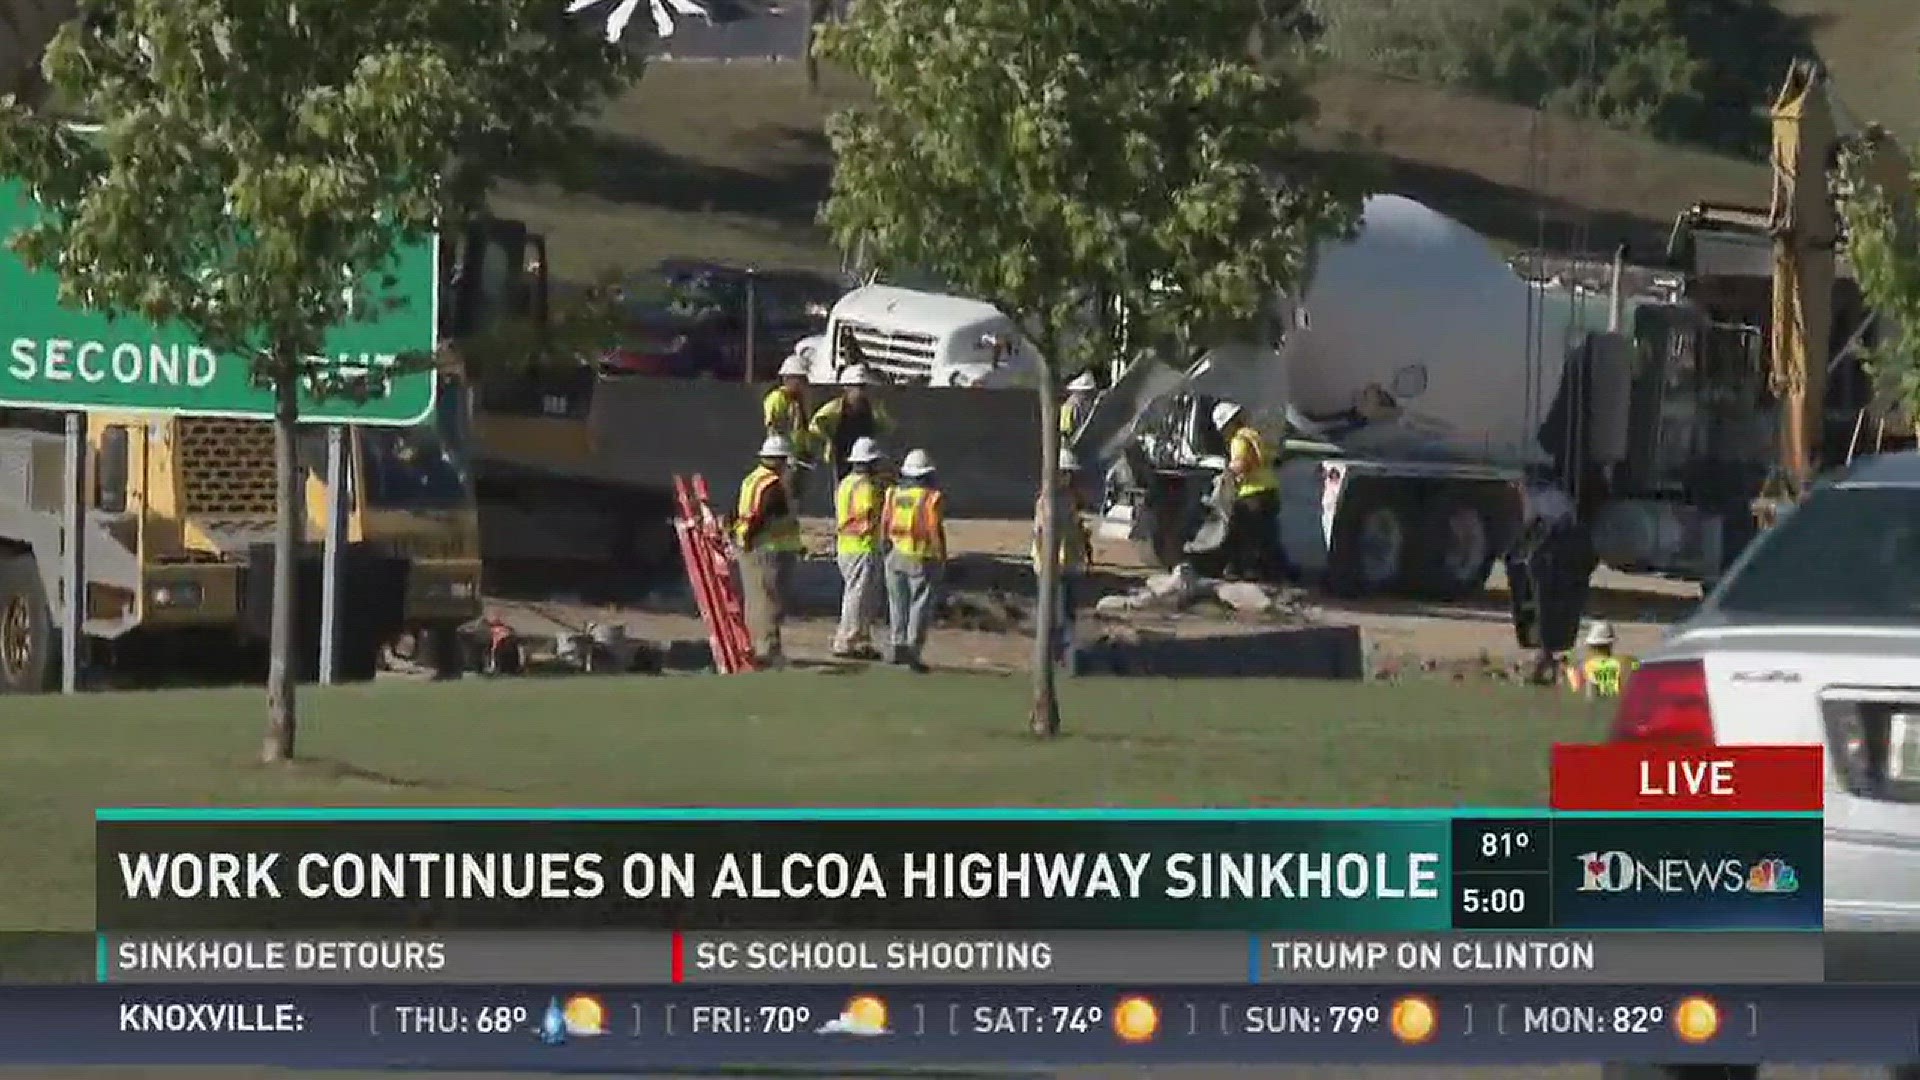 Sept. 28, 2016: Crews continue to repair a sinkhole on Alcoa Highway that opened up early Wednesday morning.